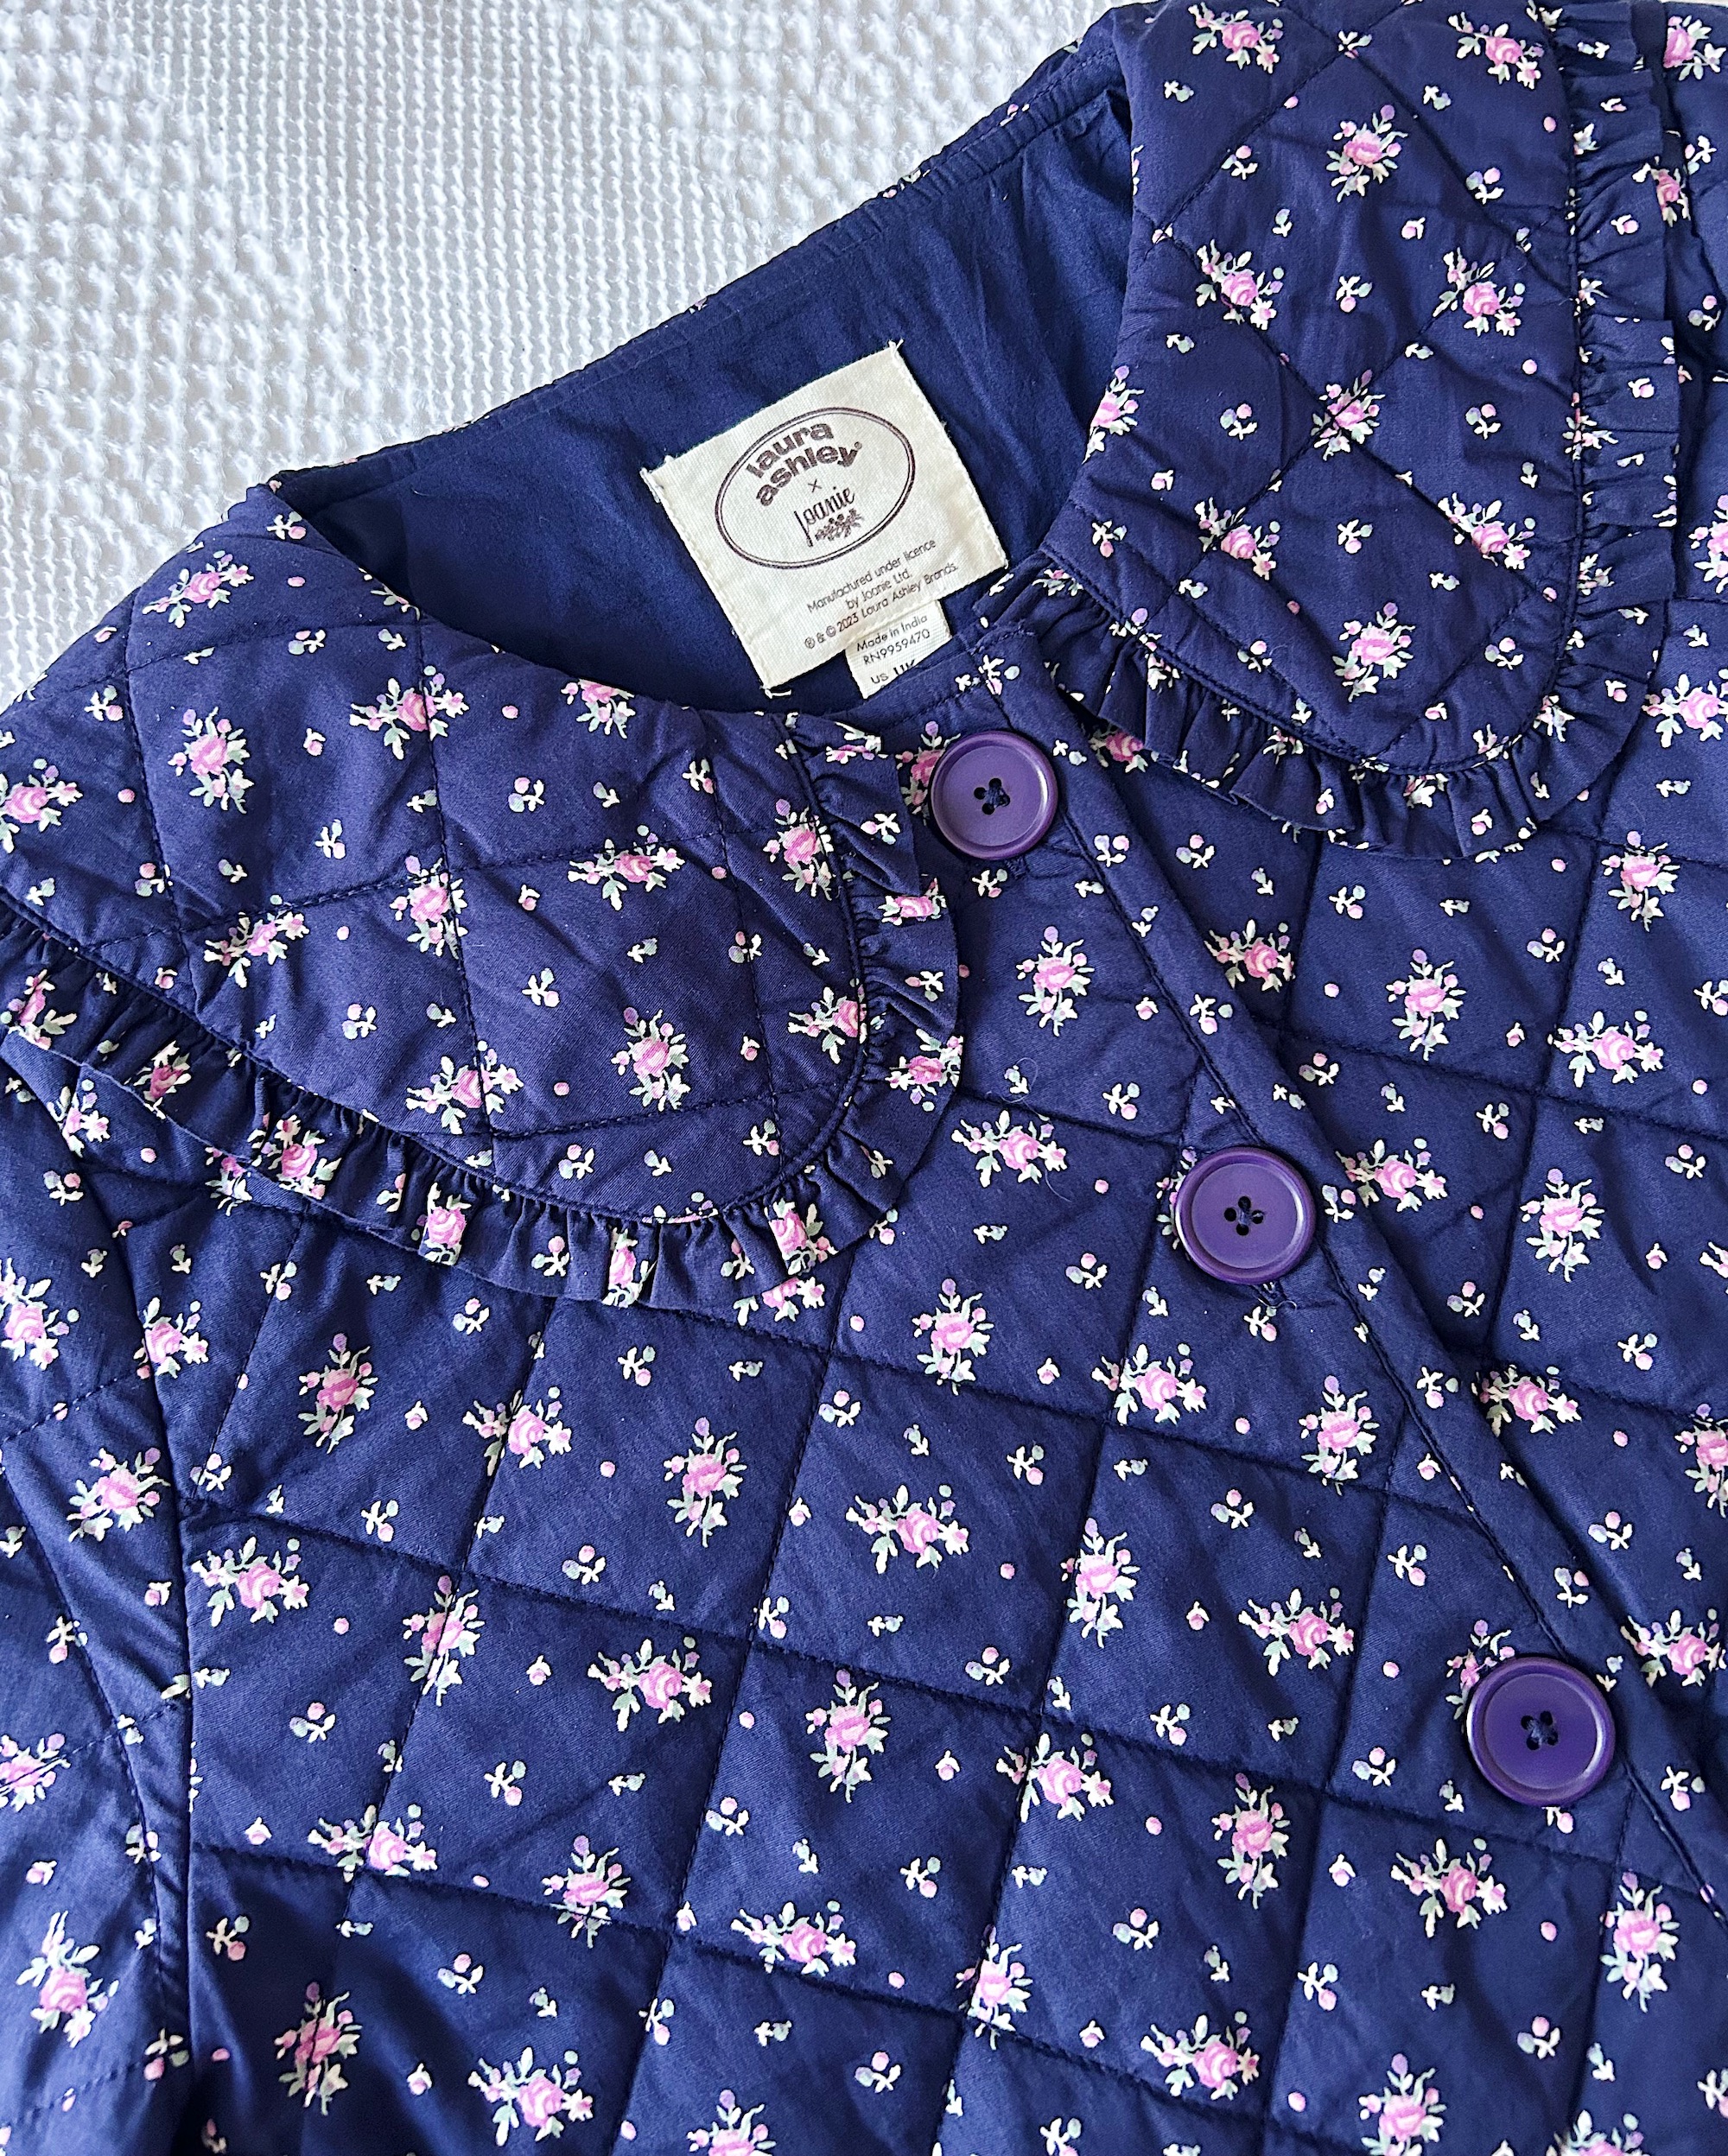 Laura Ashley x Joanie Elin Navy Ditsy Floral Quilted Jacket Review